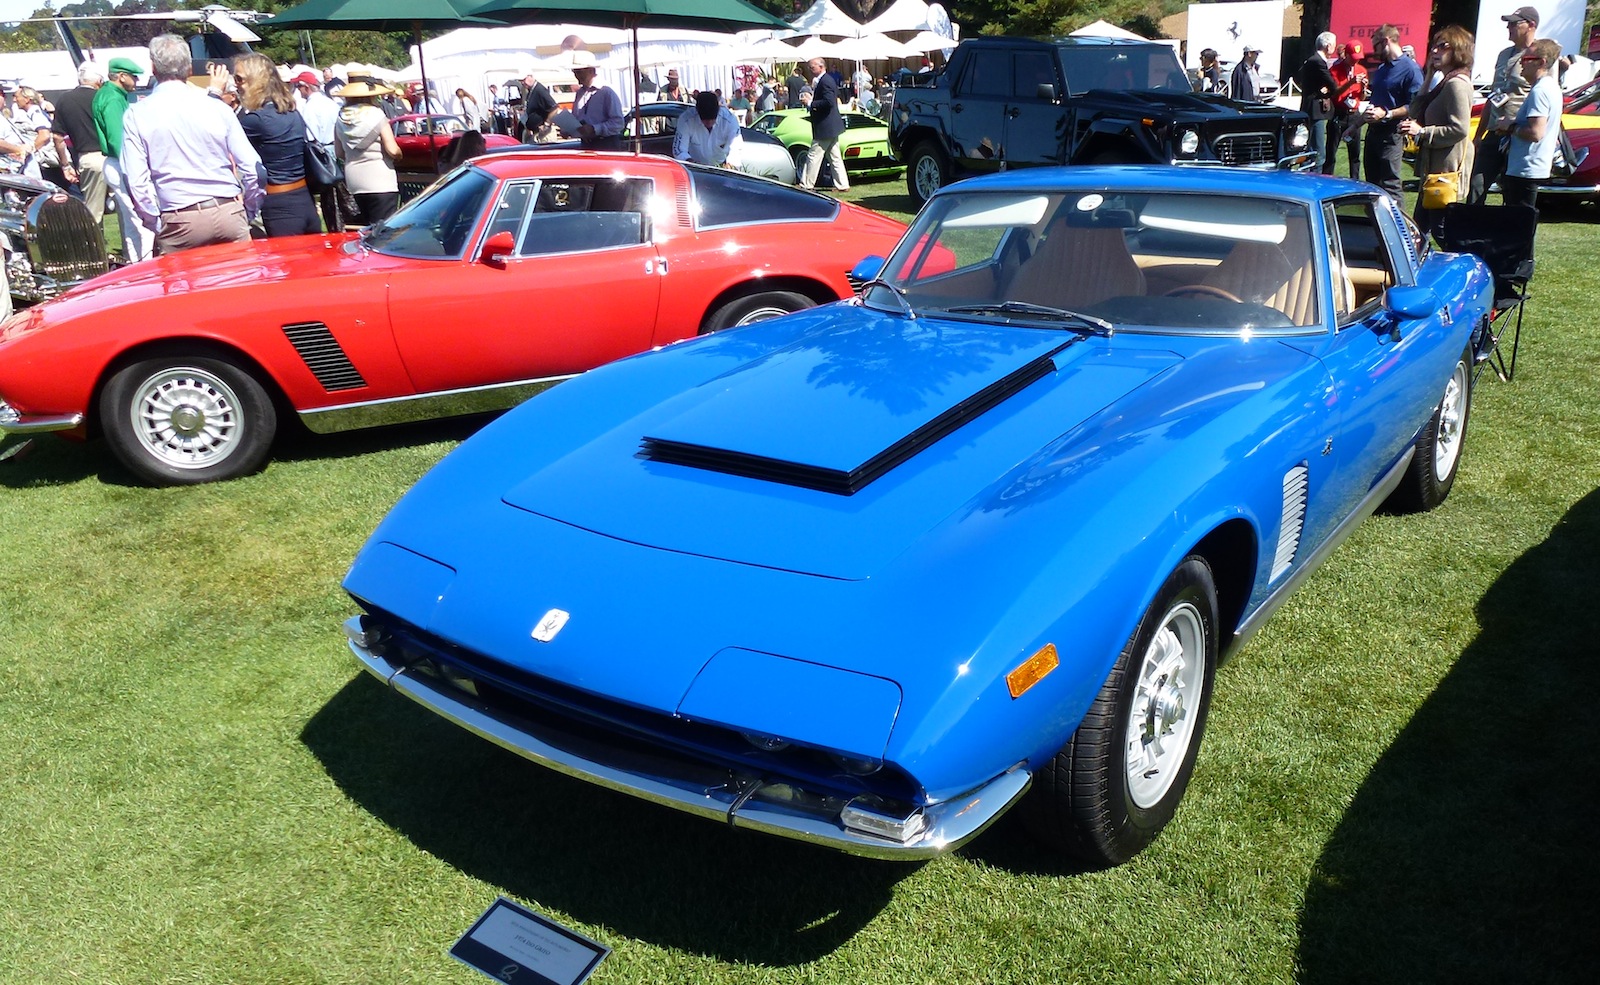 The Iso Grifo - A Legend - Part One